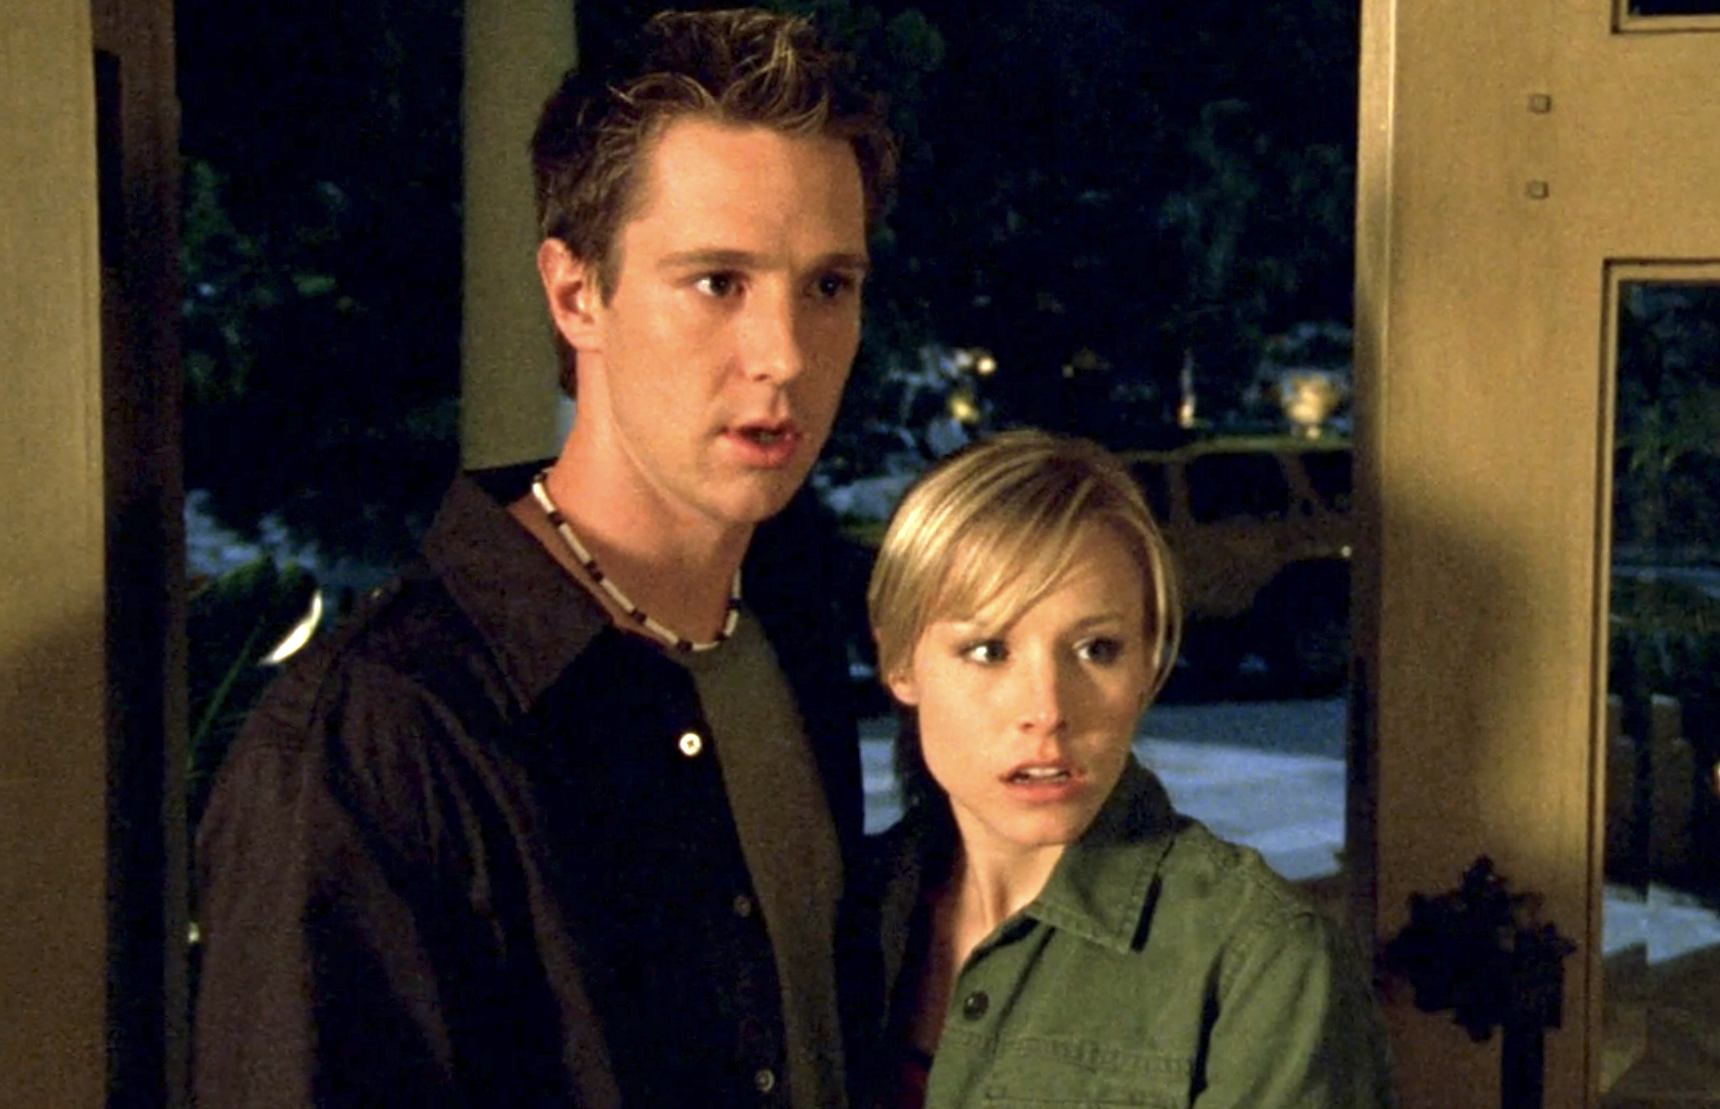 Screenshot from S1E21 of Veronica Mars. Logan in brown and Veronica in an army green. They are standing in the front door looking shocked.